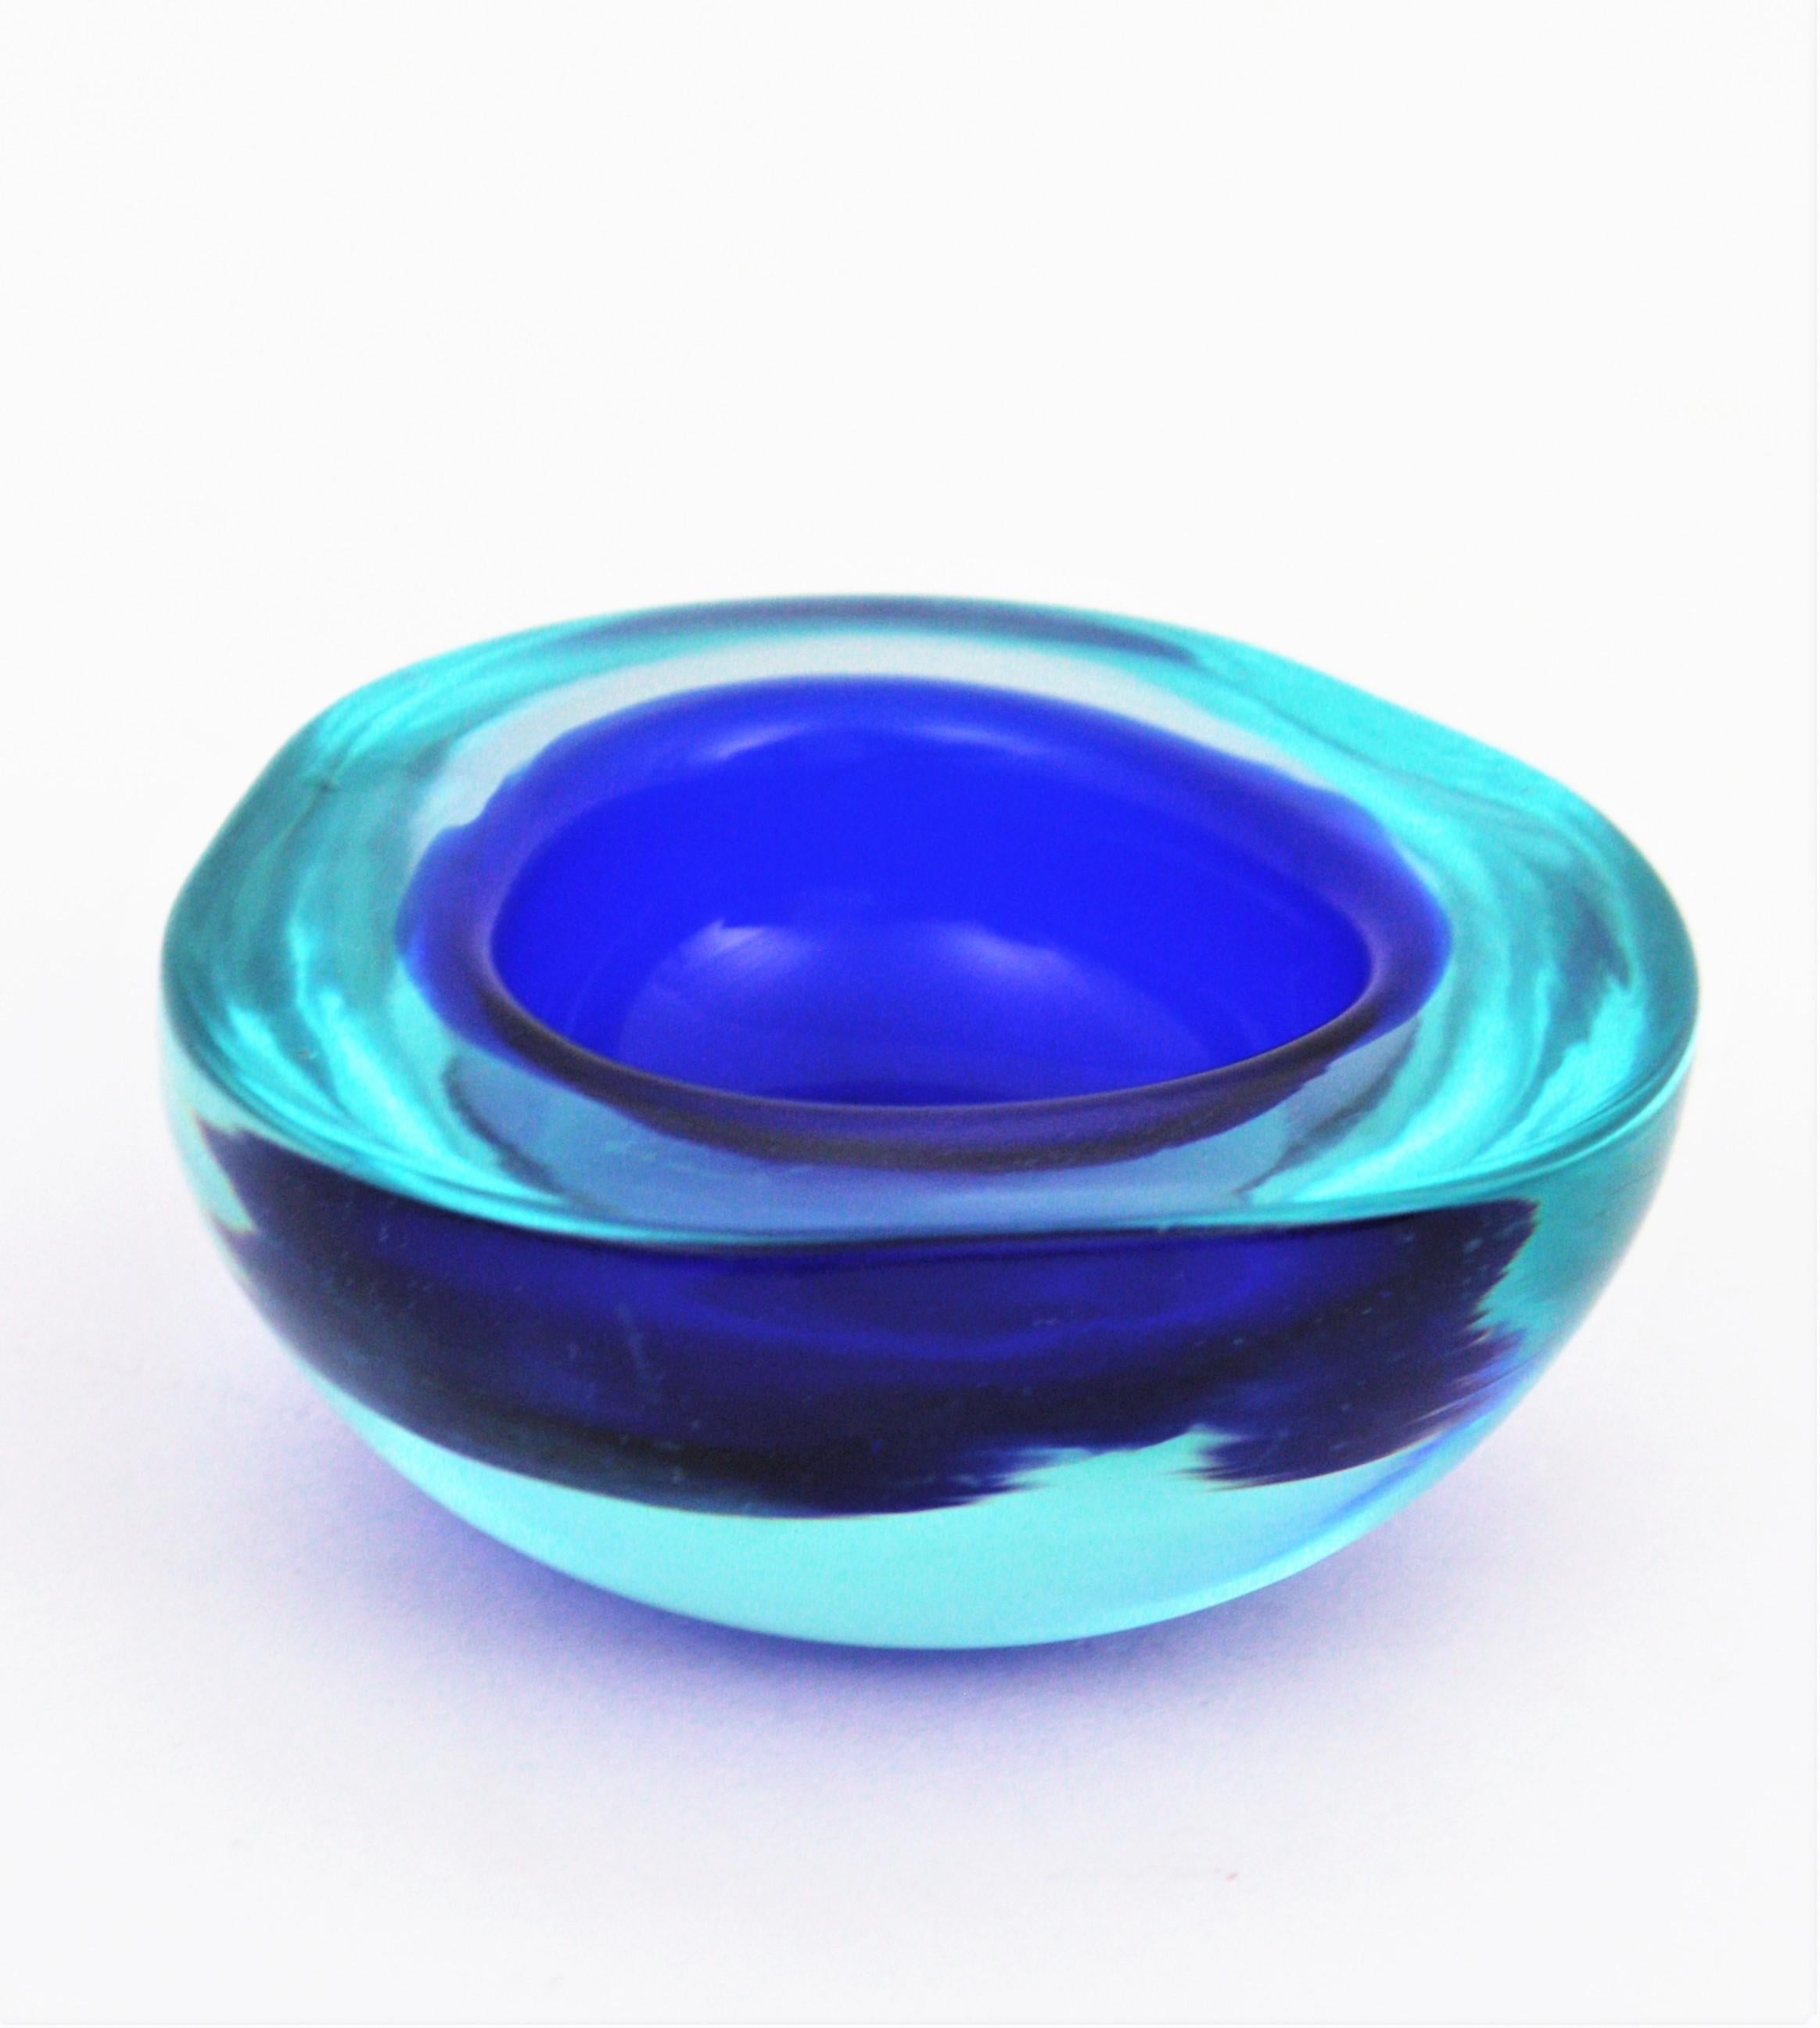 Archimede Seguso Murano Small Sommerso Blue Glass Geode Bowl, 1960s For Sale 4